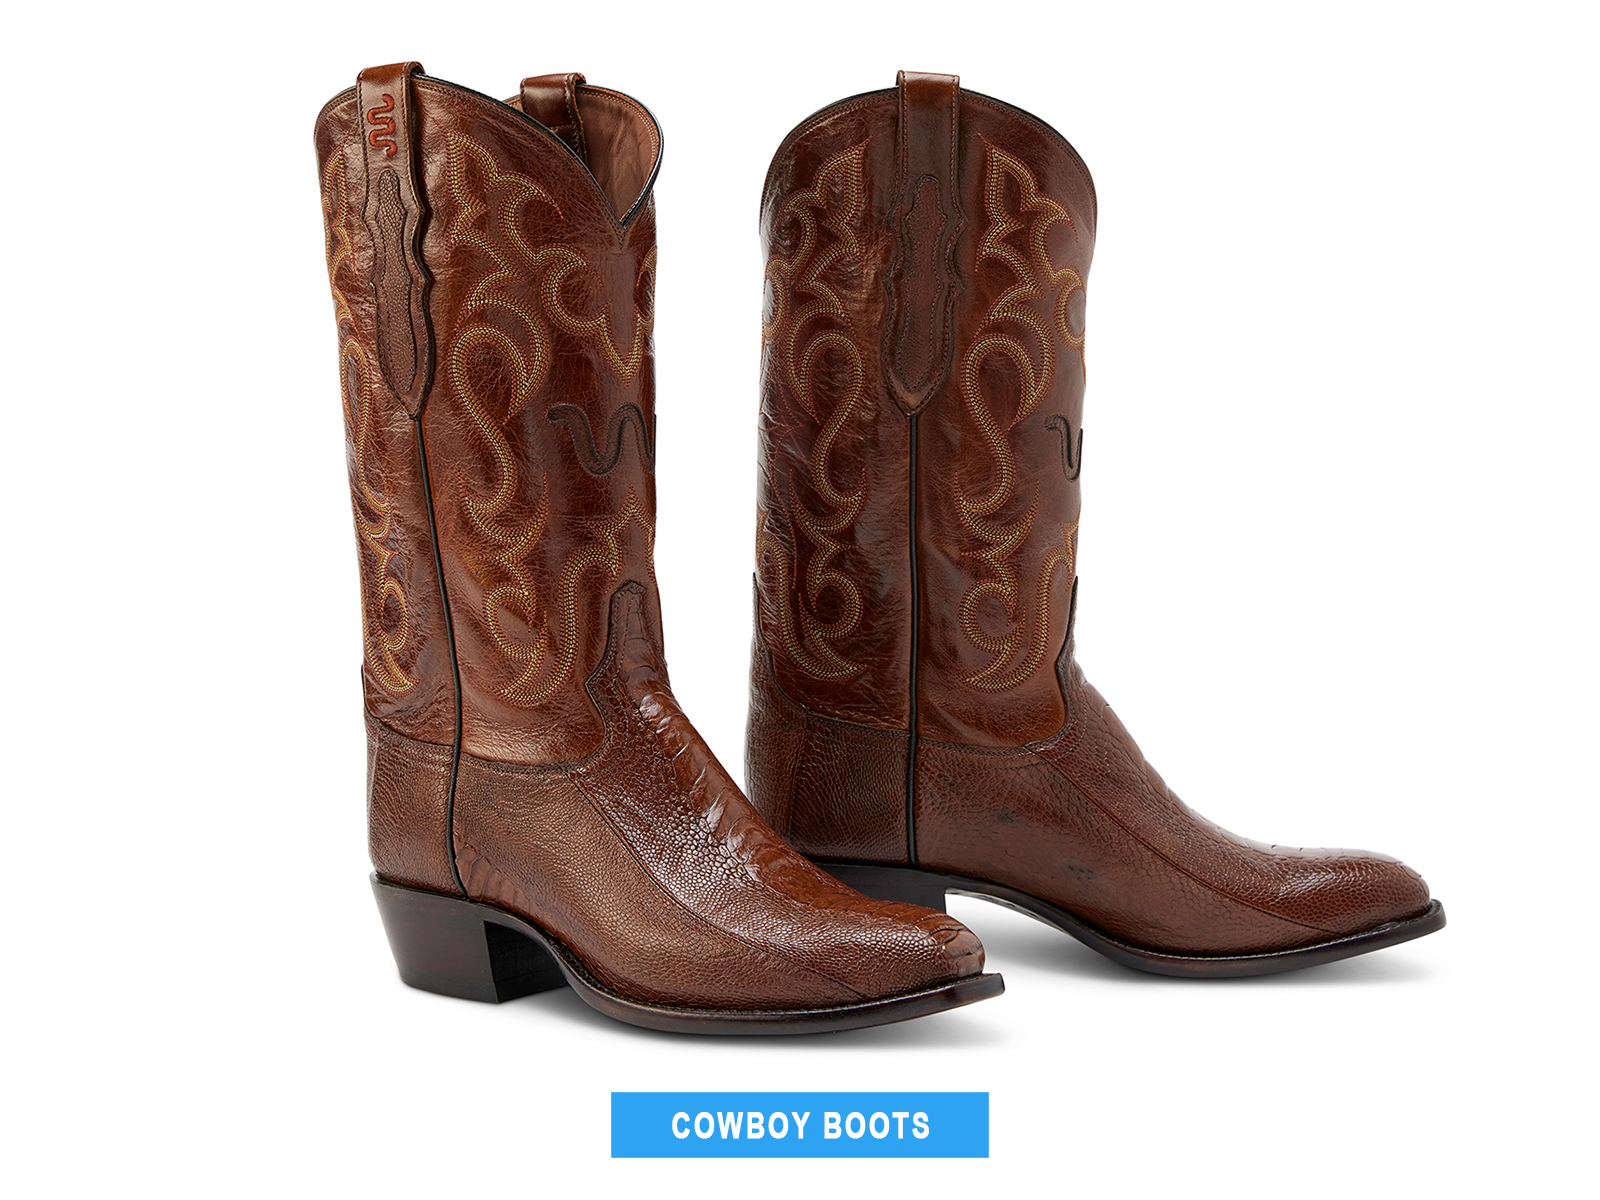 cowboy boots style for men